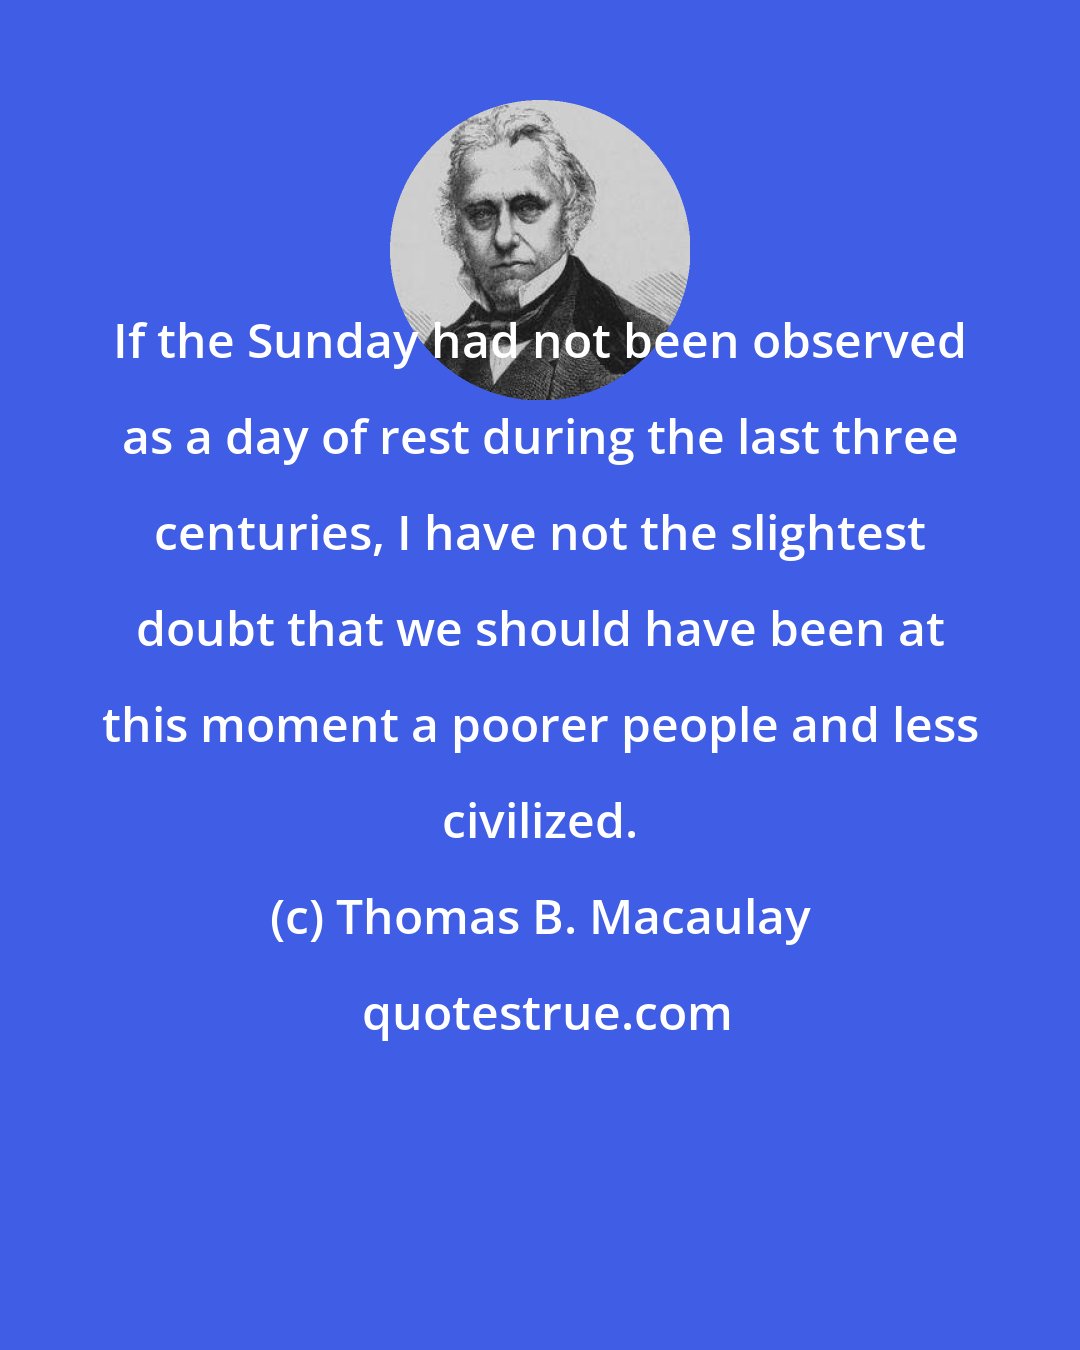 Thomas B. Macaulay: If the Sunday had not been observed as a day of rest during the last three centuries, I have not the slightest doubt that we should have been at this moment a poorer people and less civilized.